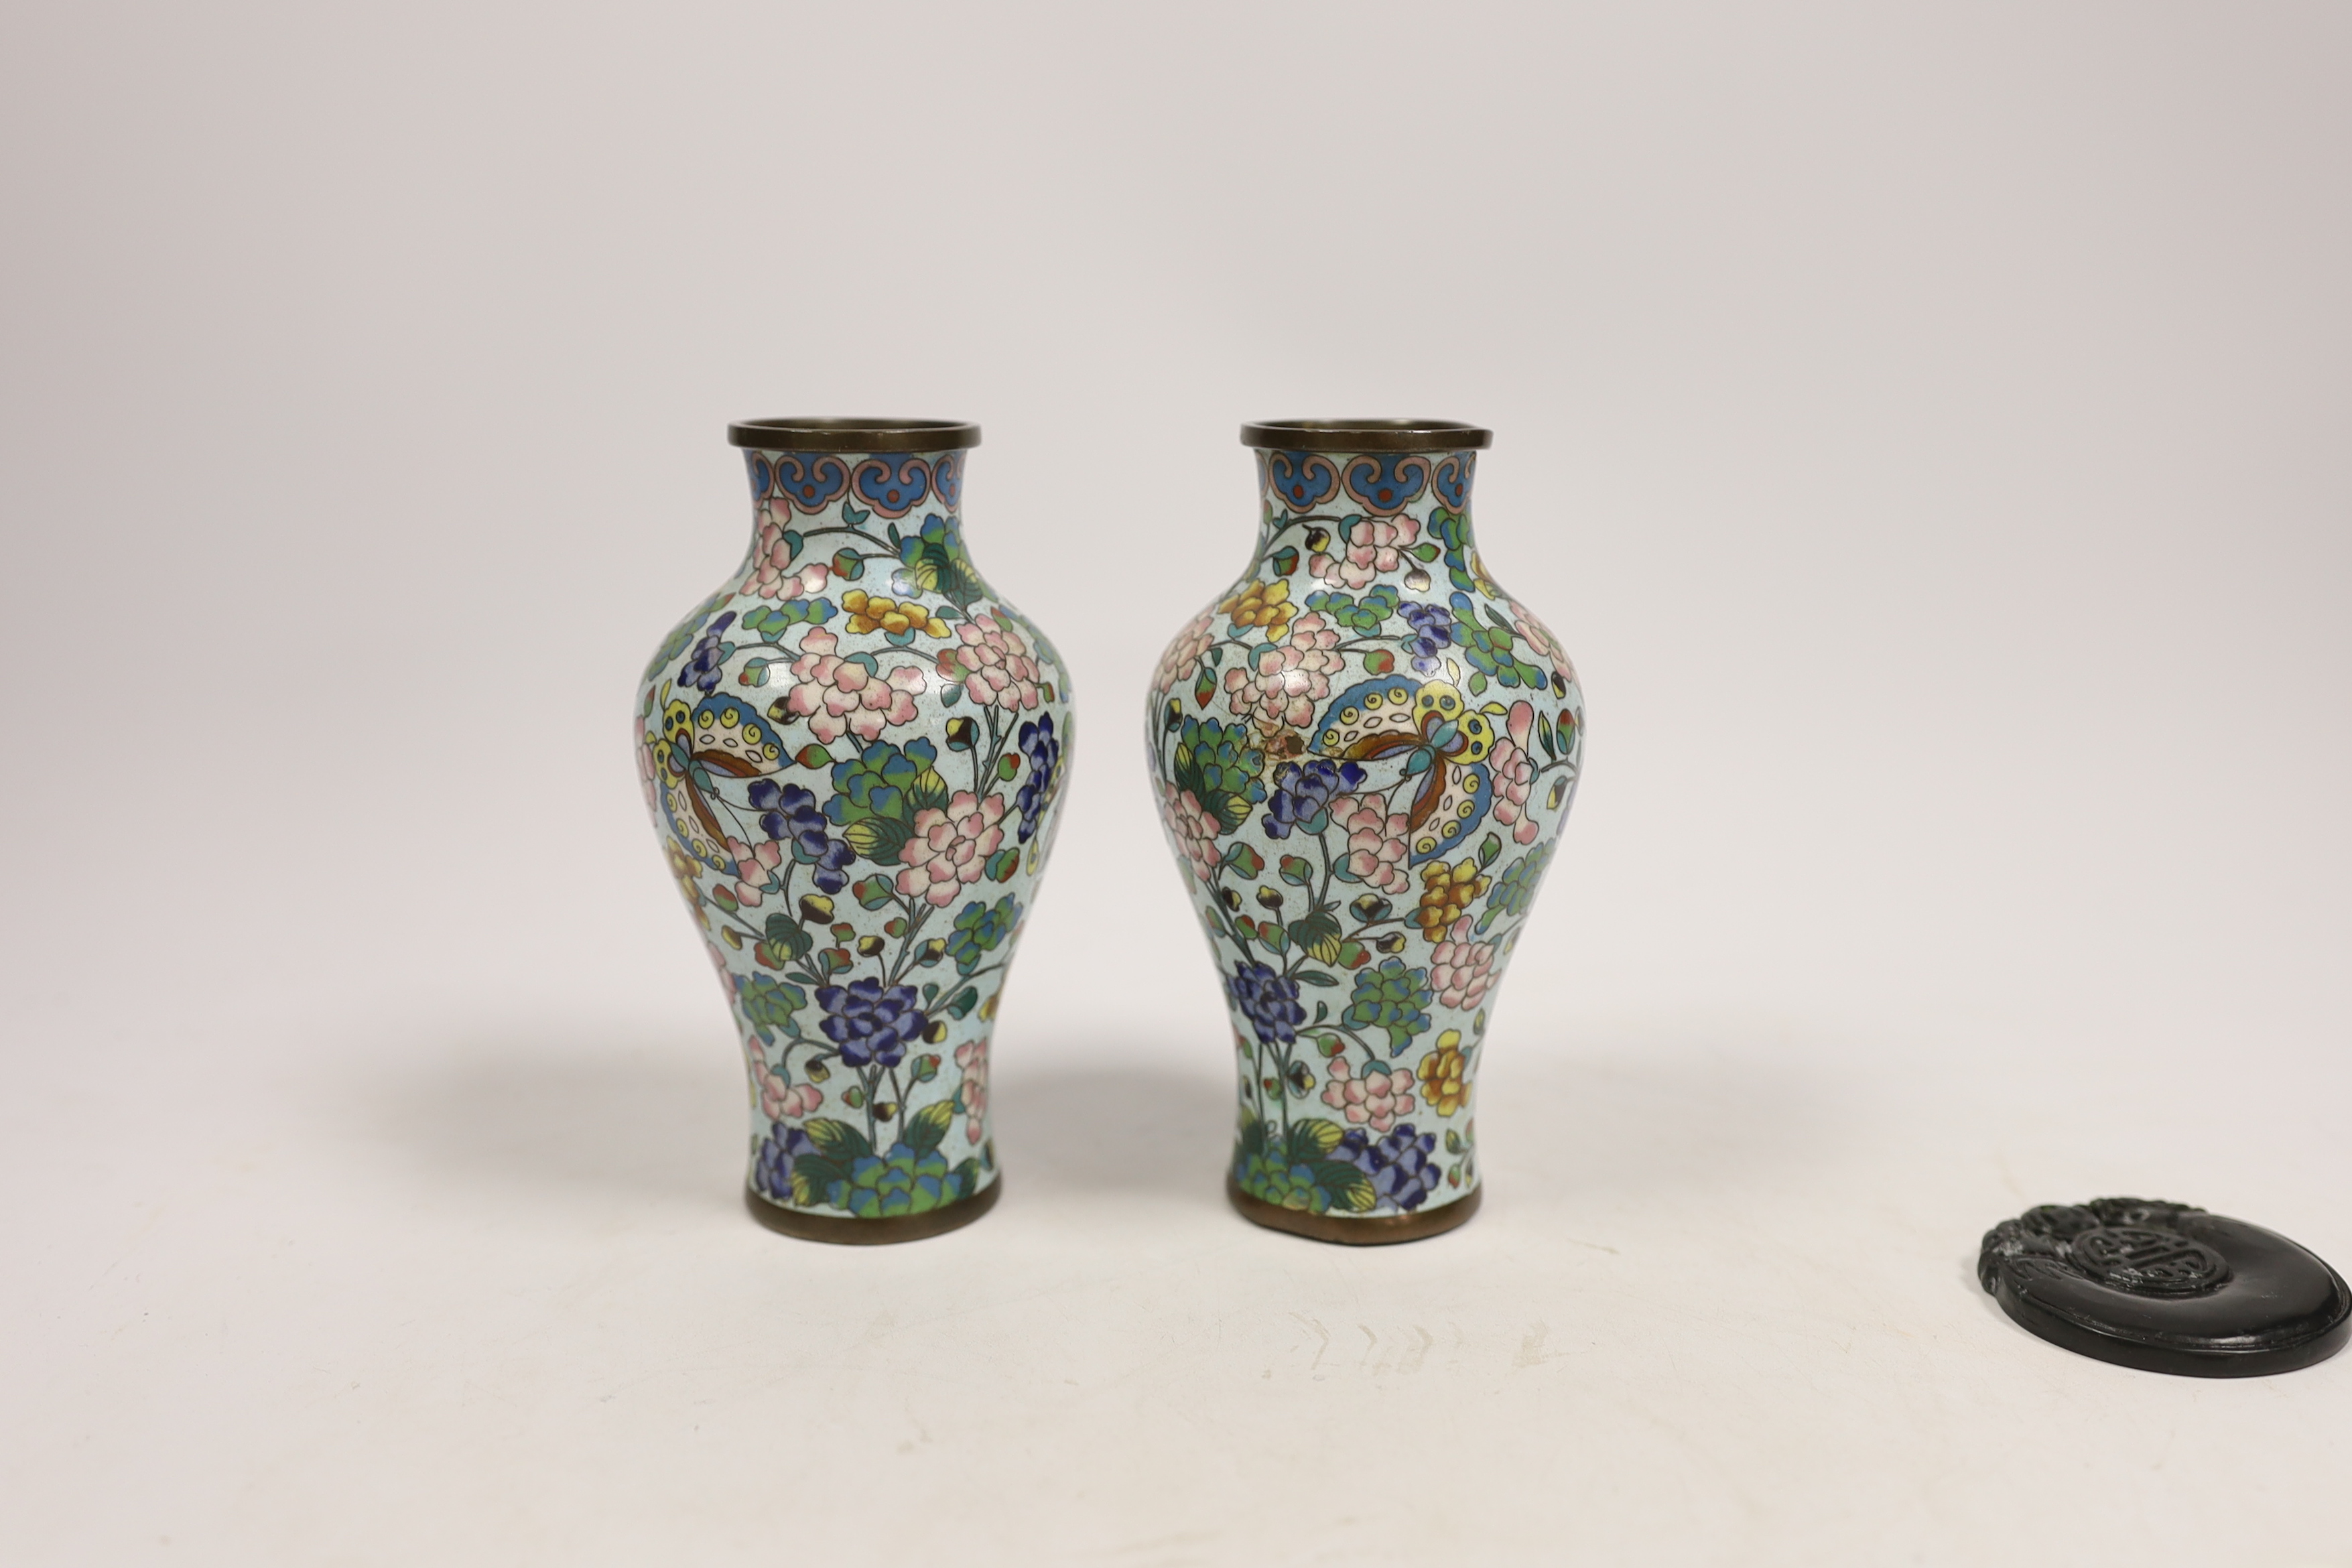 A pair of Chinese cloisonné enamel vases, 12.5cm, a lacquered box with mother of pearl inlay, a - Image 4 of 4